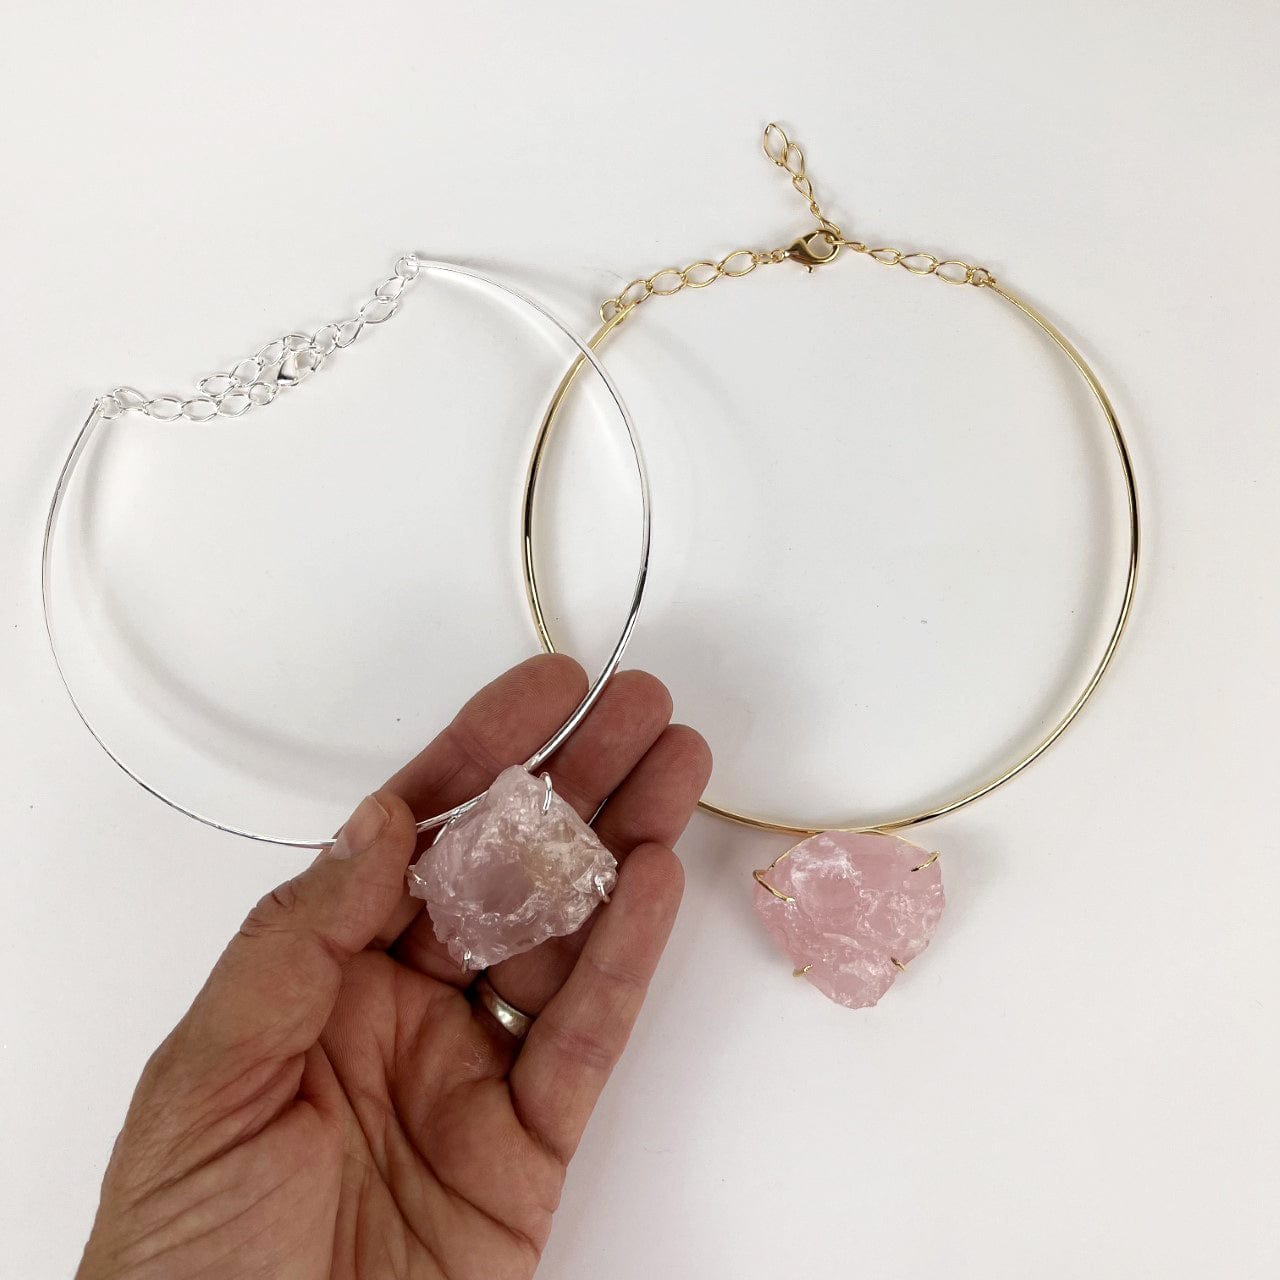 Rose quartz choker in gold and silver in a hand for sizing